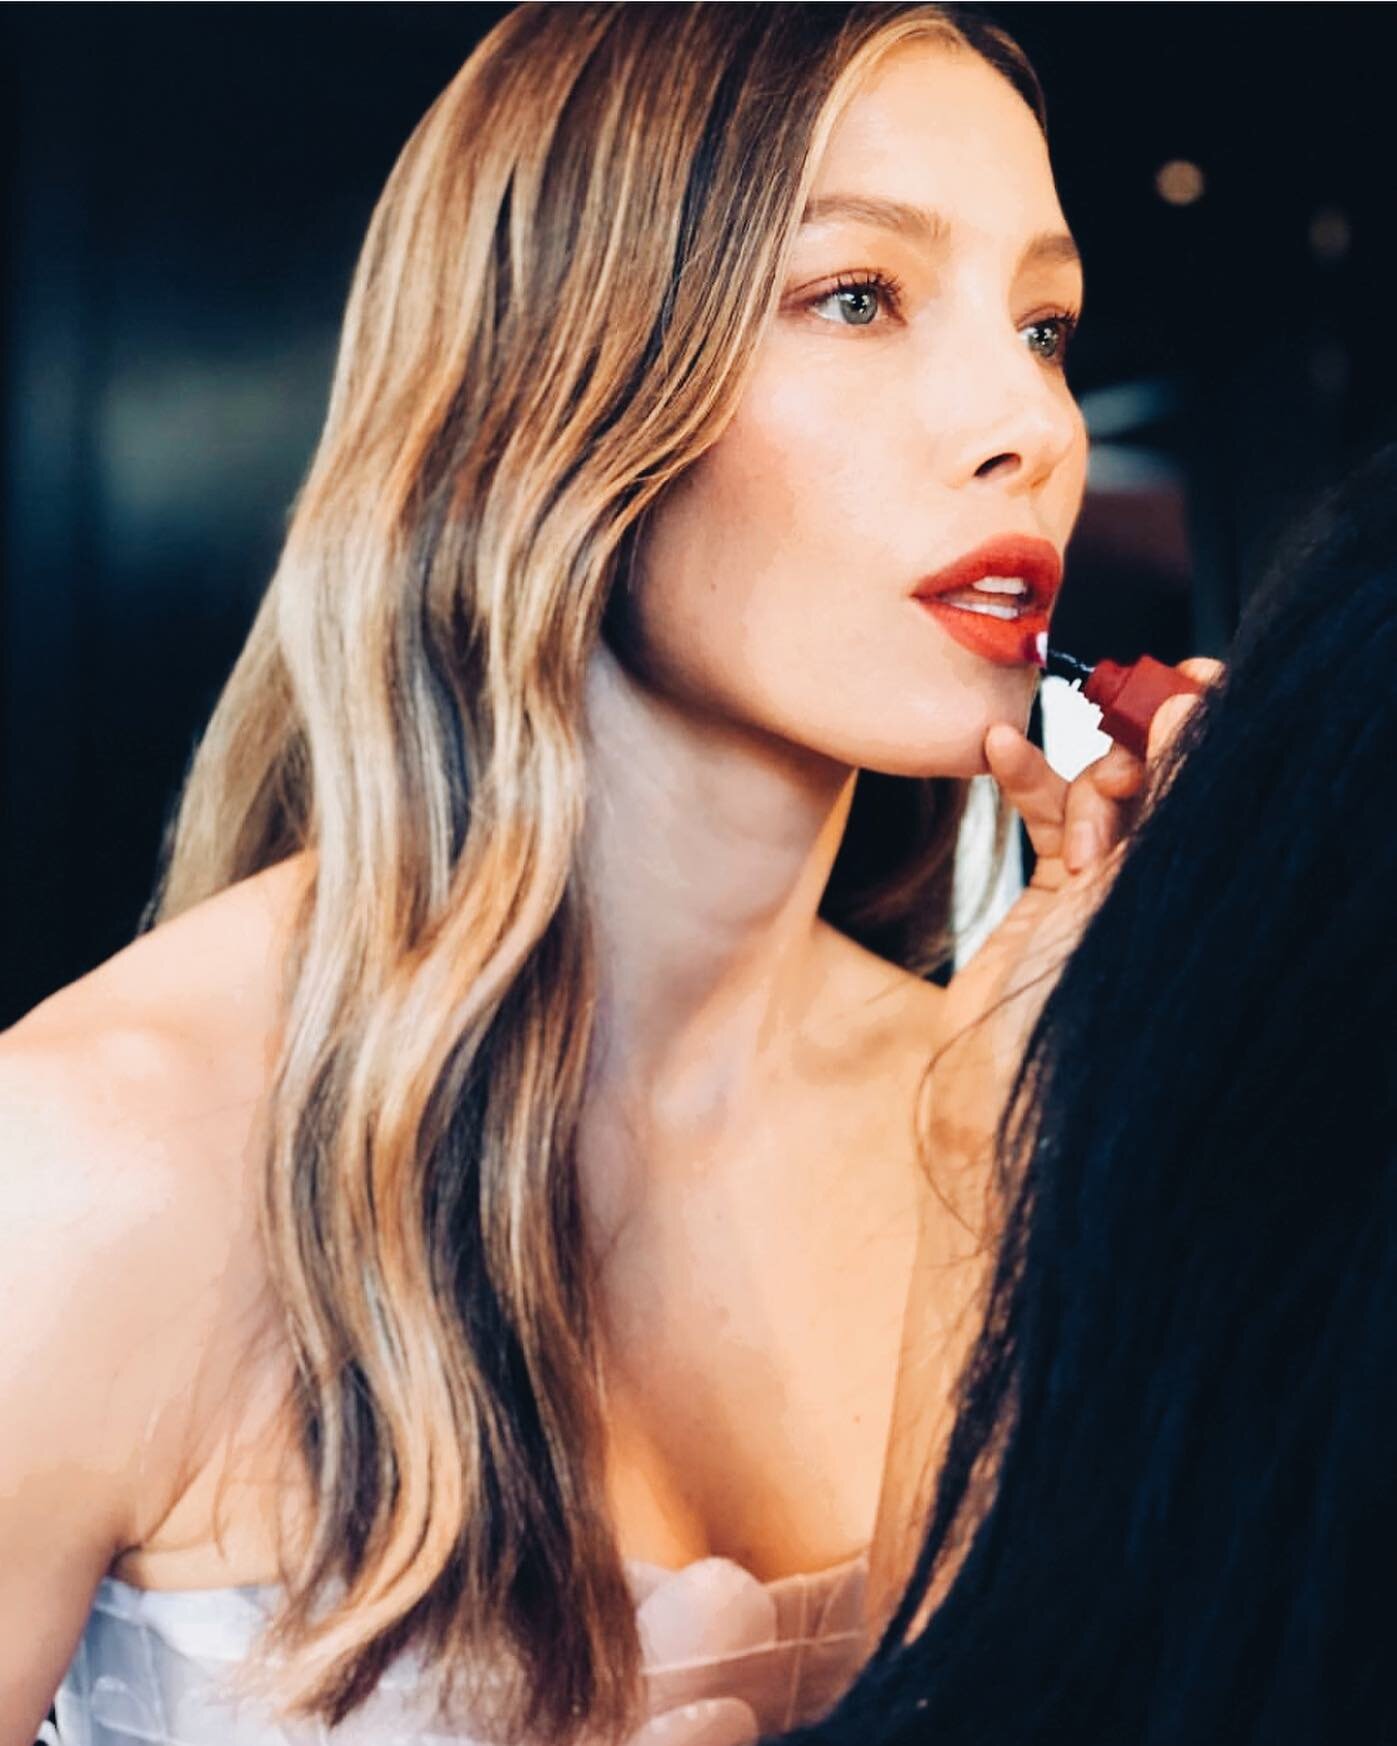 More fall color inspiration! Take your #summerblonde down a notch with some dramatic #lowlights and a #sandy #colorgloss @jessicabiel @hairbyadir @traceycunningham1  @lorealpro